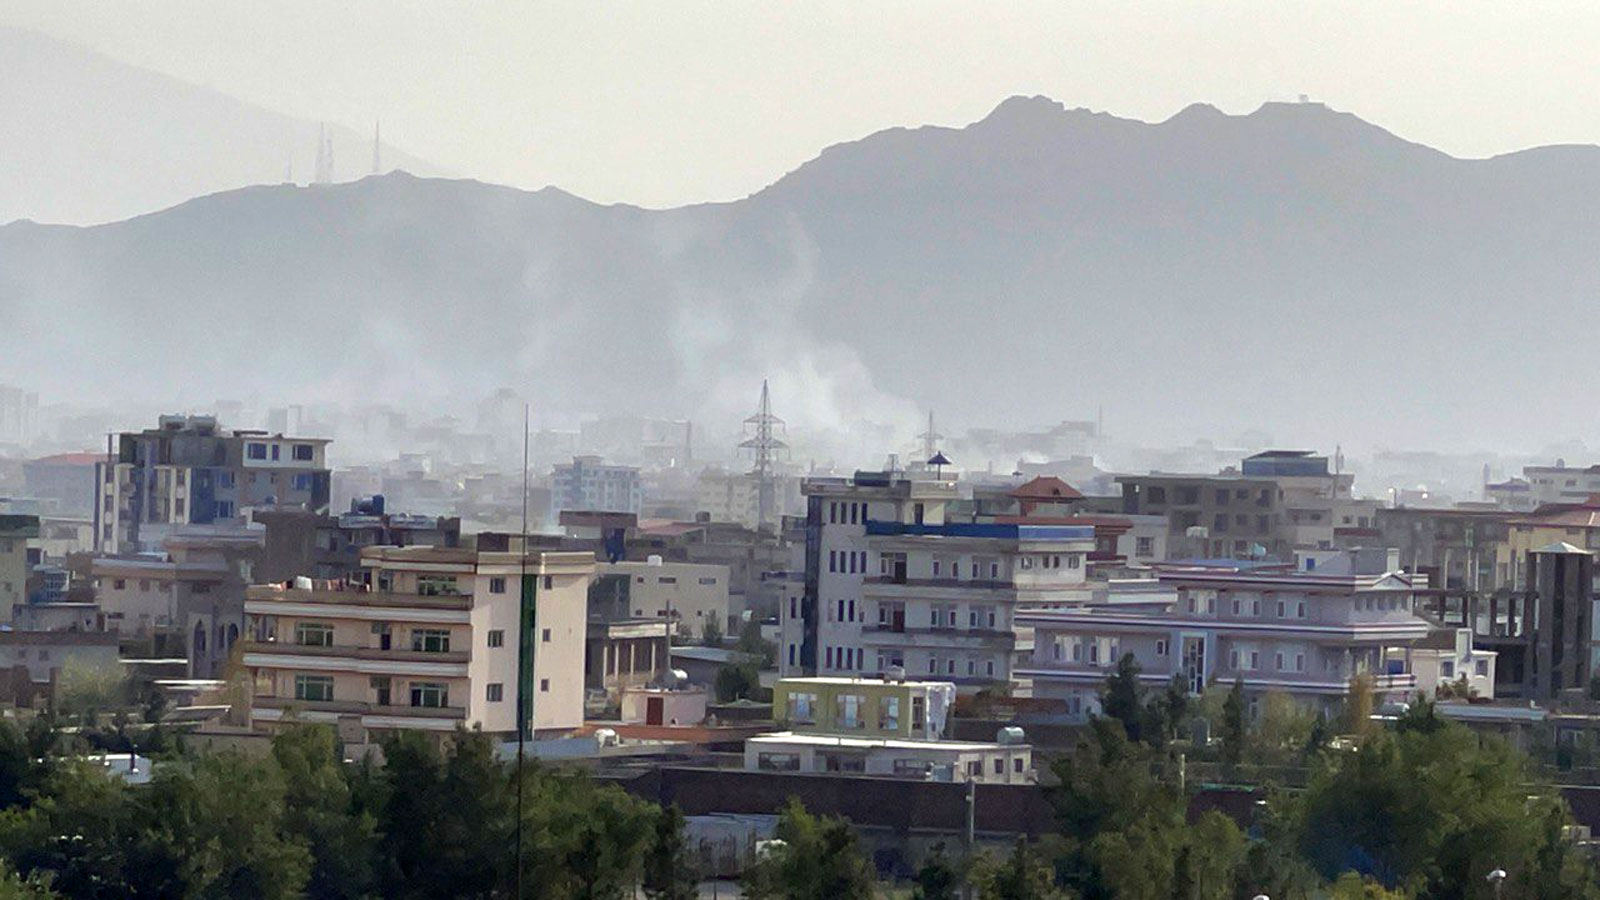 Smoke rises after an explosion in Kabul, Afghanistan, on August 29, 2021.